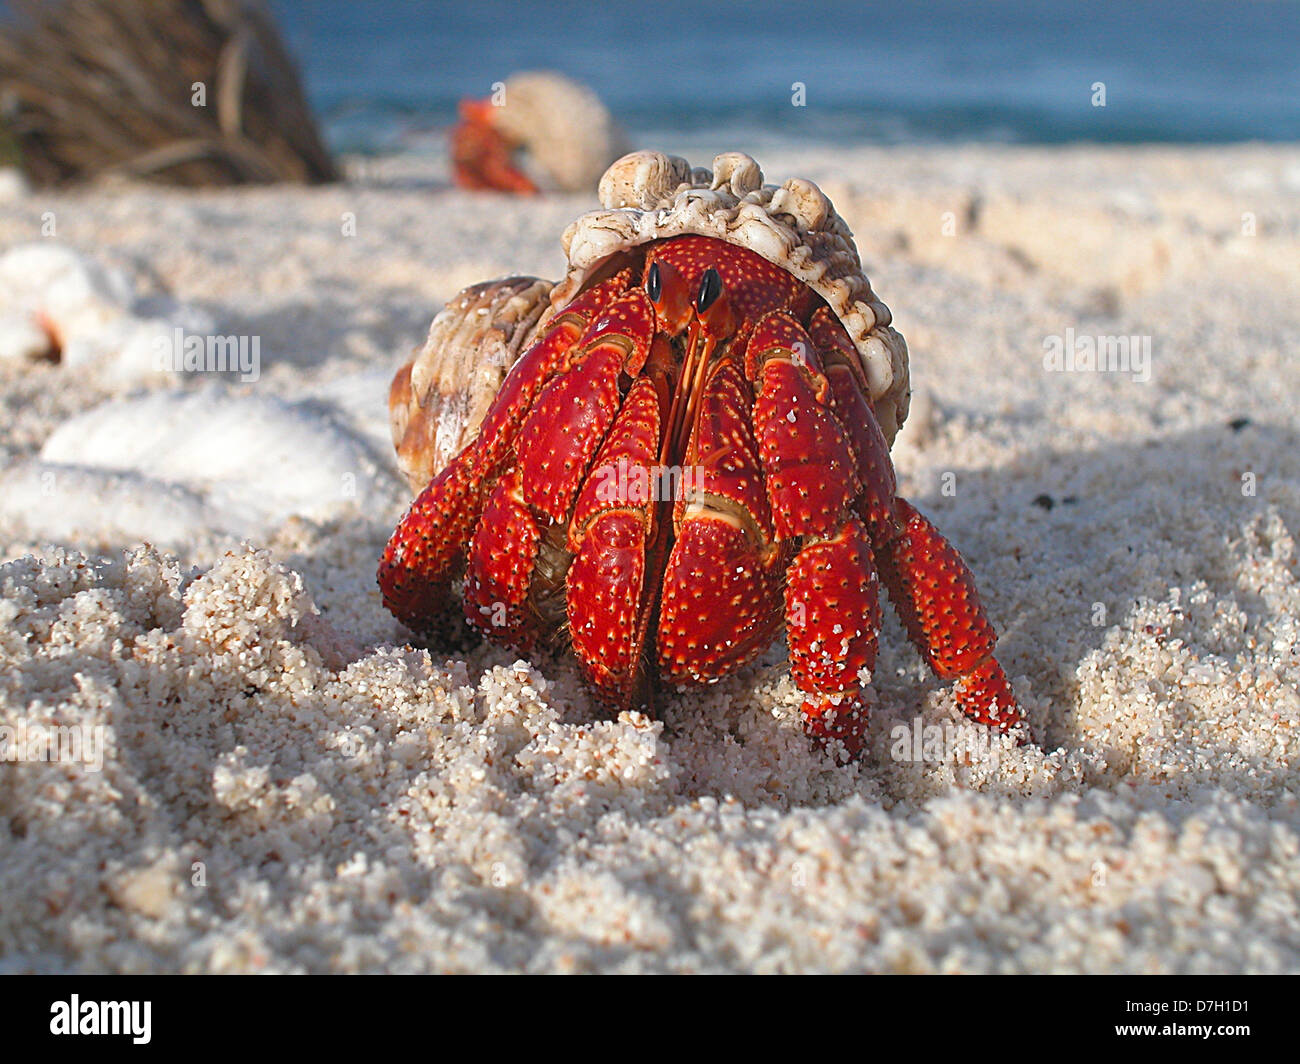 A hermit crab emerges from its shell at Howland Island National Wildlife Refuge in the Pacific Ocean 1,600 miles southwest of Honolulu June 27, 2008. Stock Photo